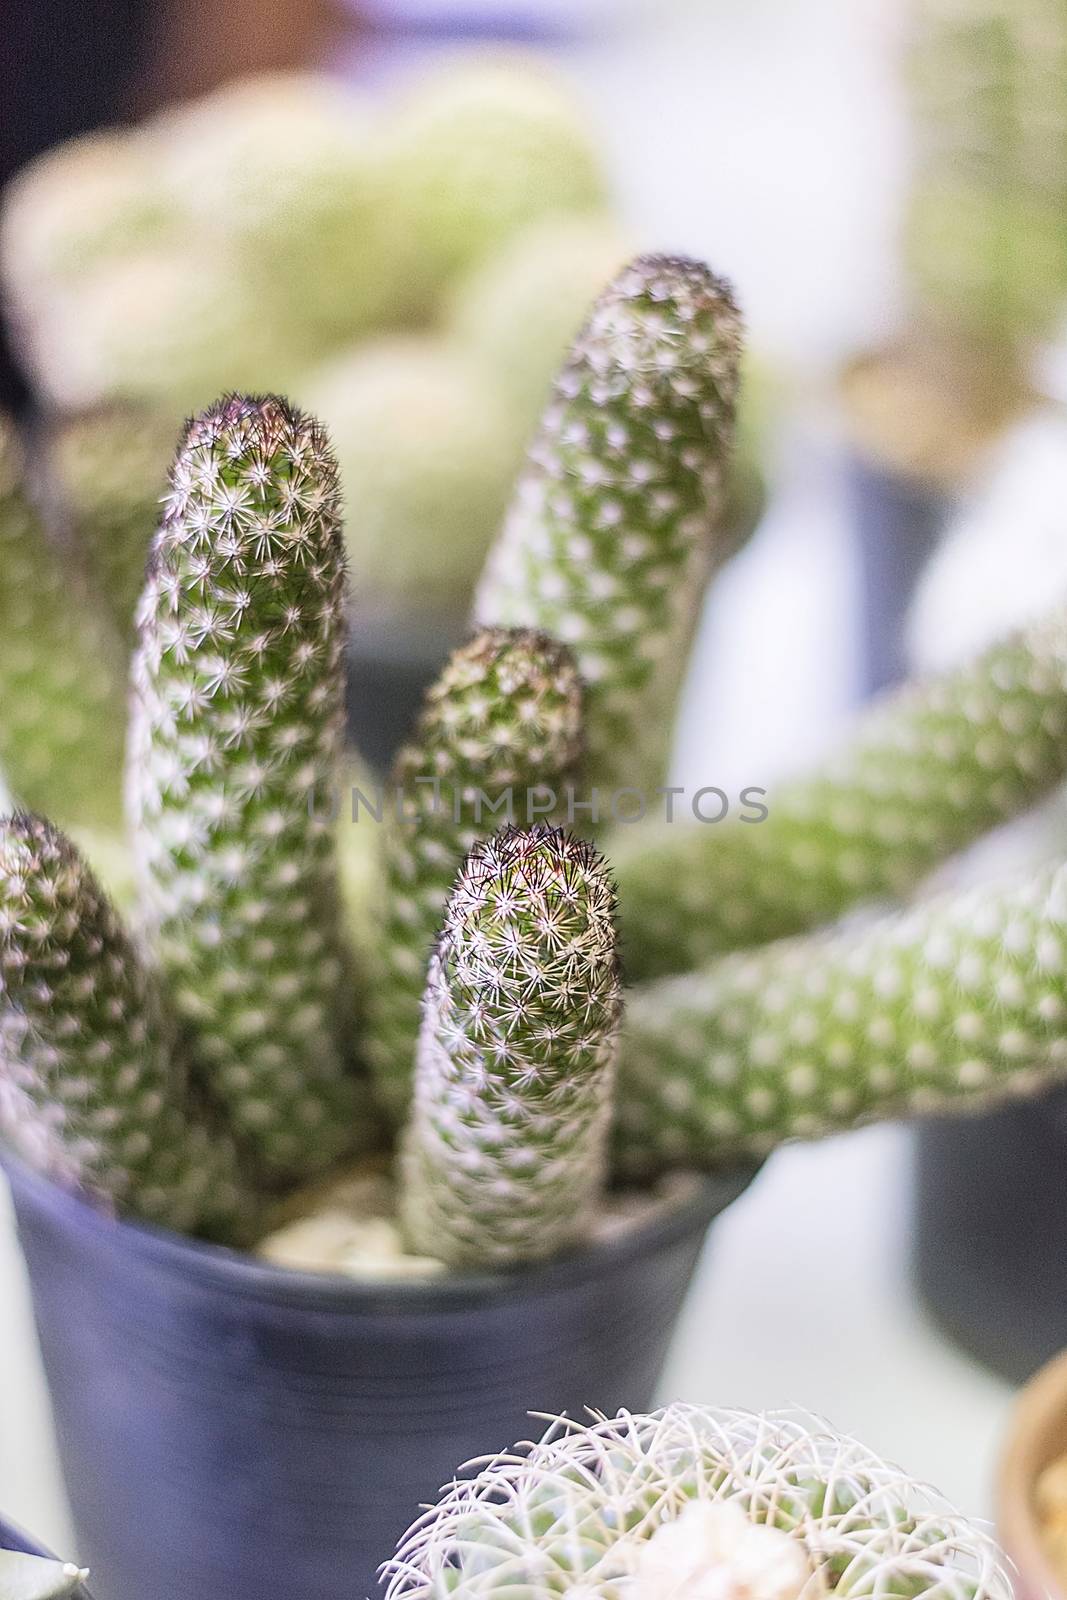 Close up of beautiful cactus with thorns